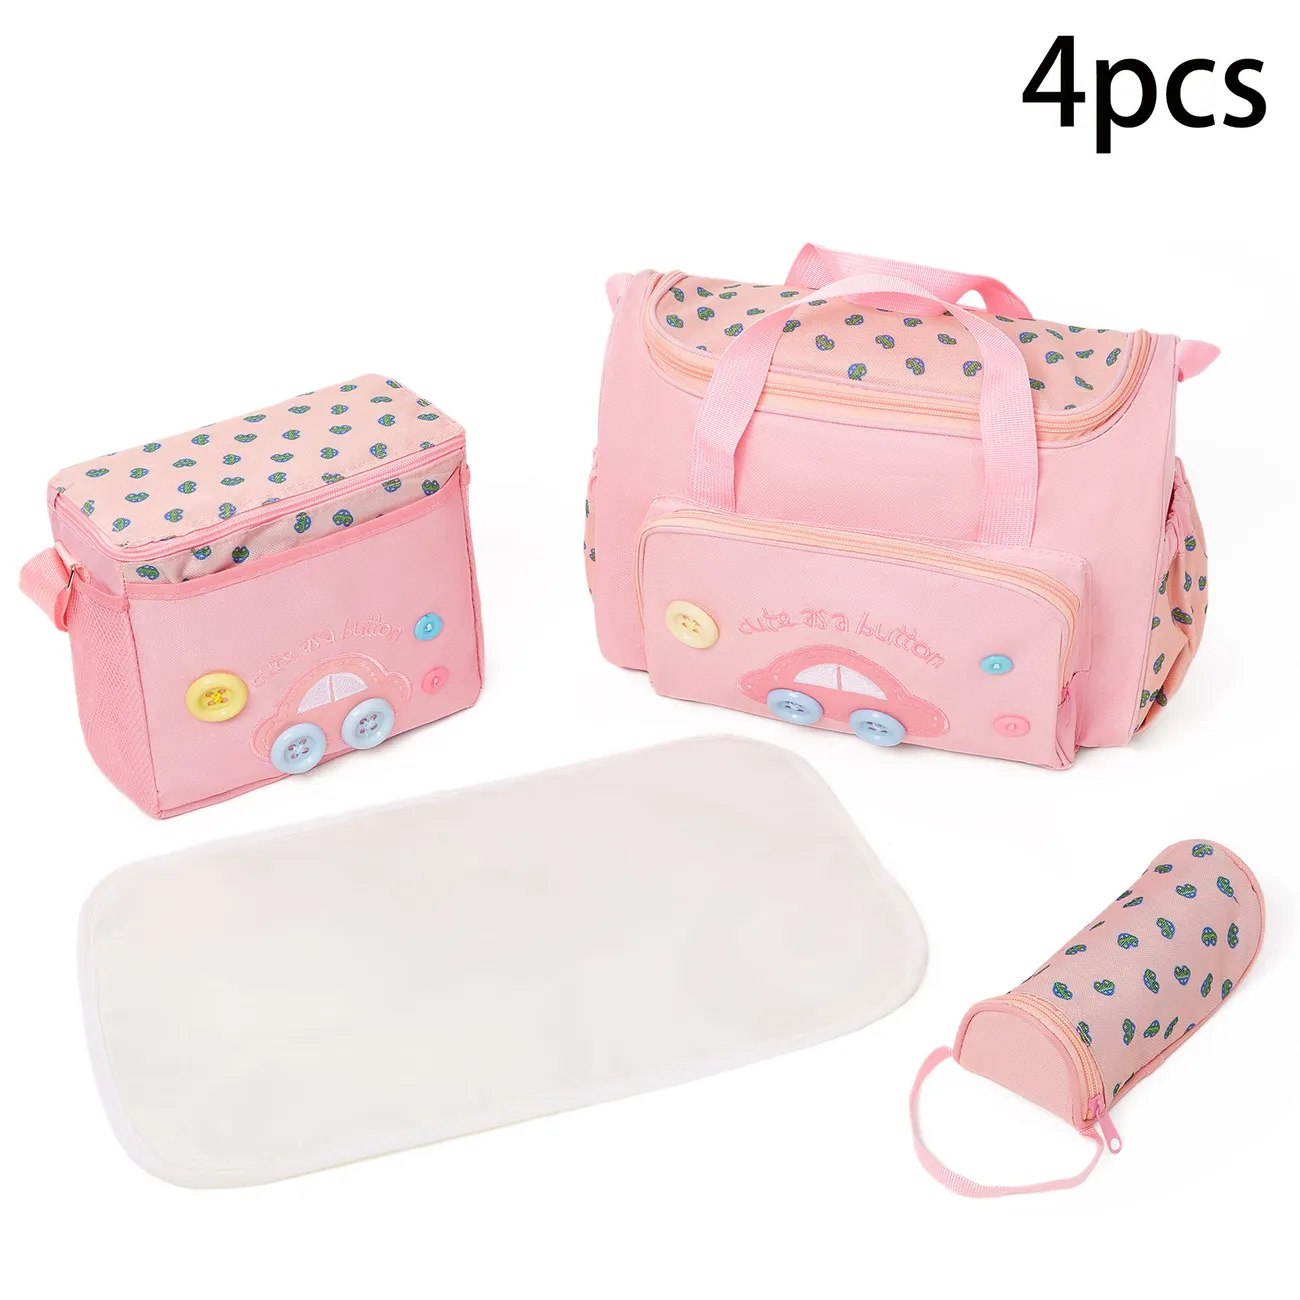 4-piece multifunctional fashionable maternity bag with compartments and bottle cover Pink big image 1